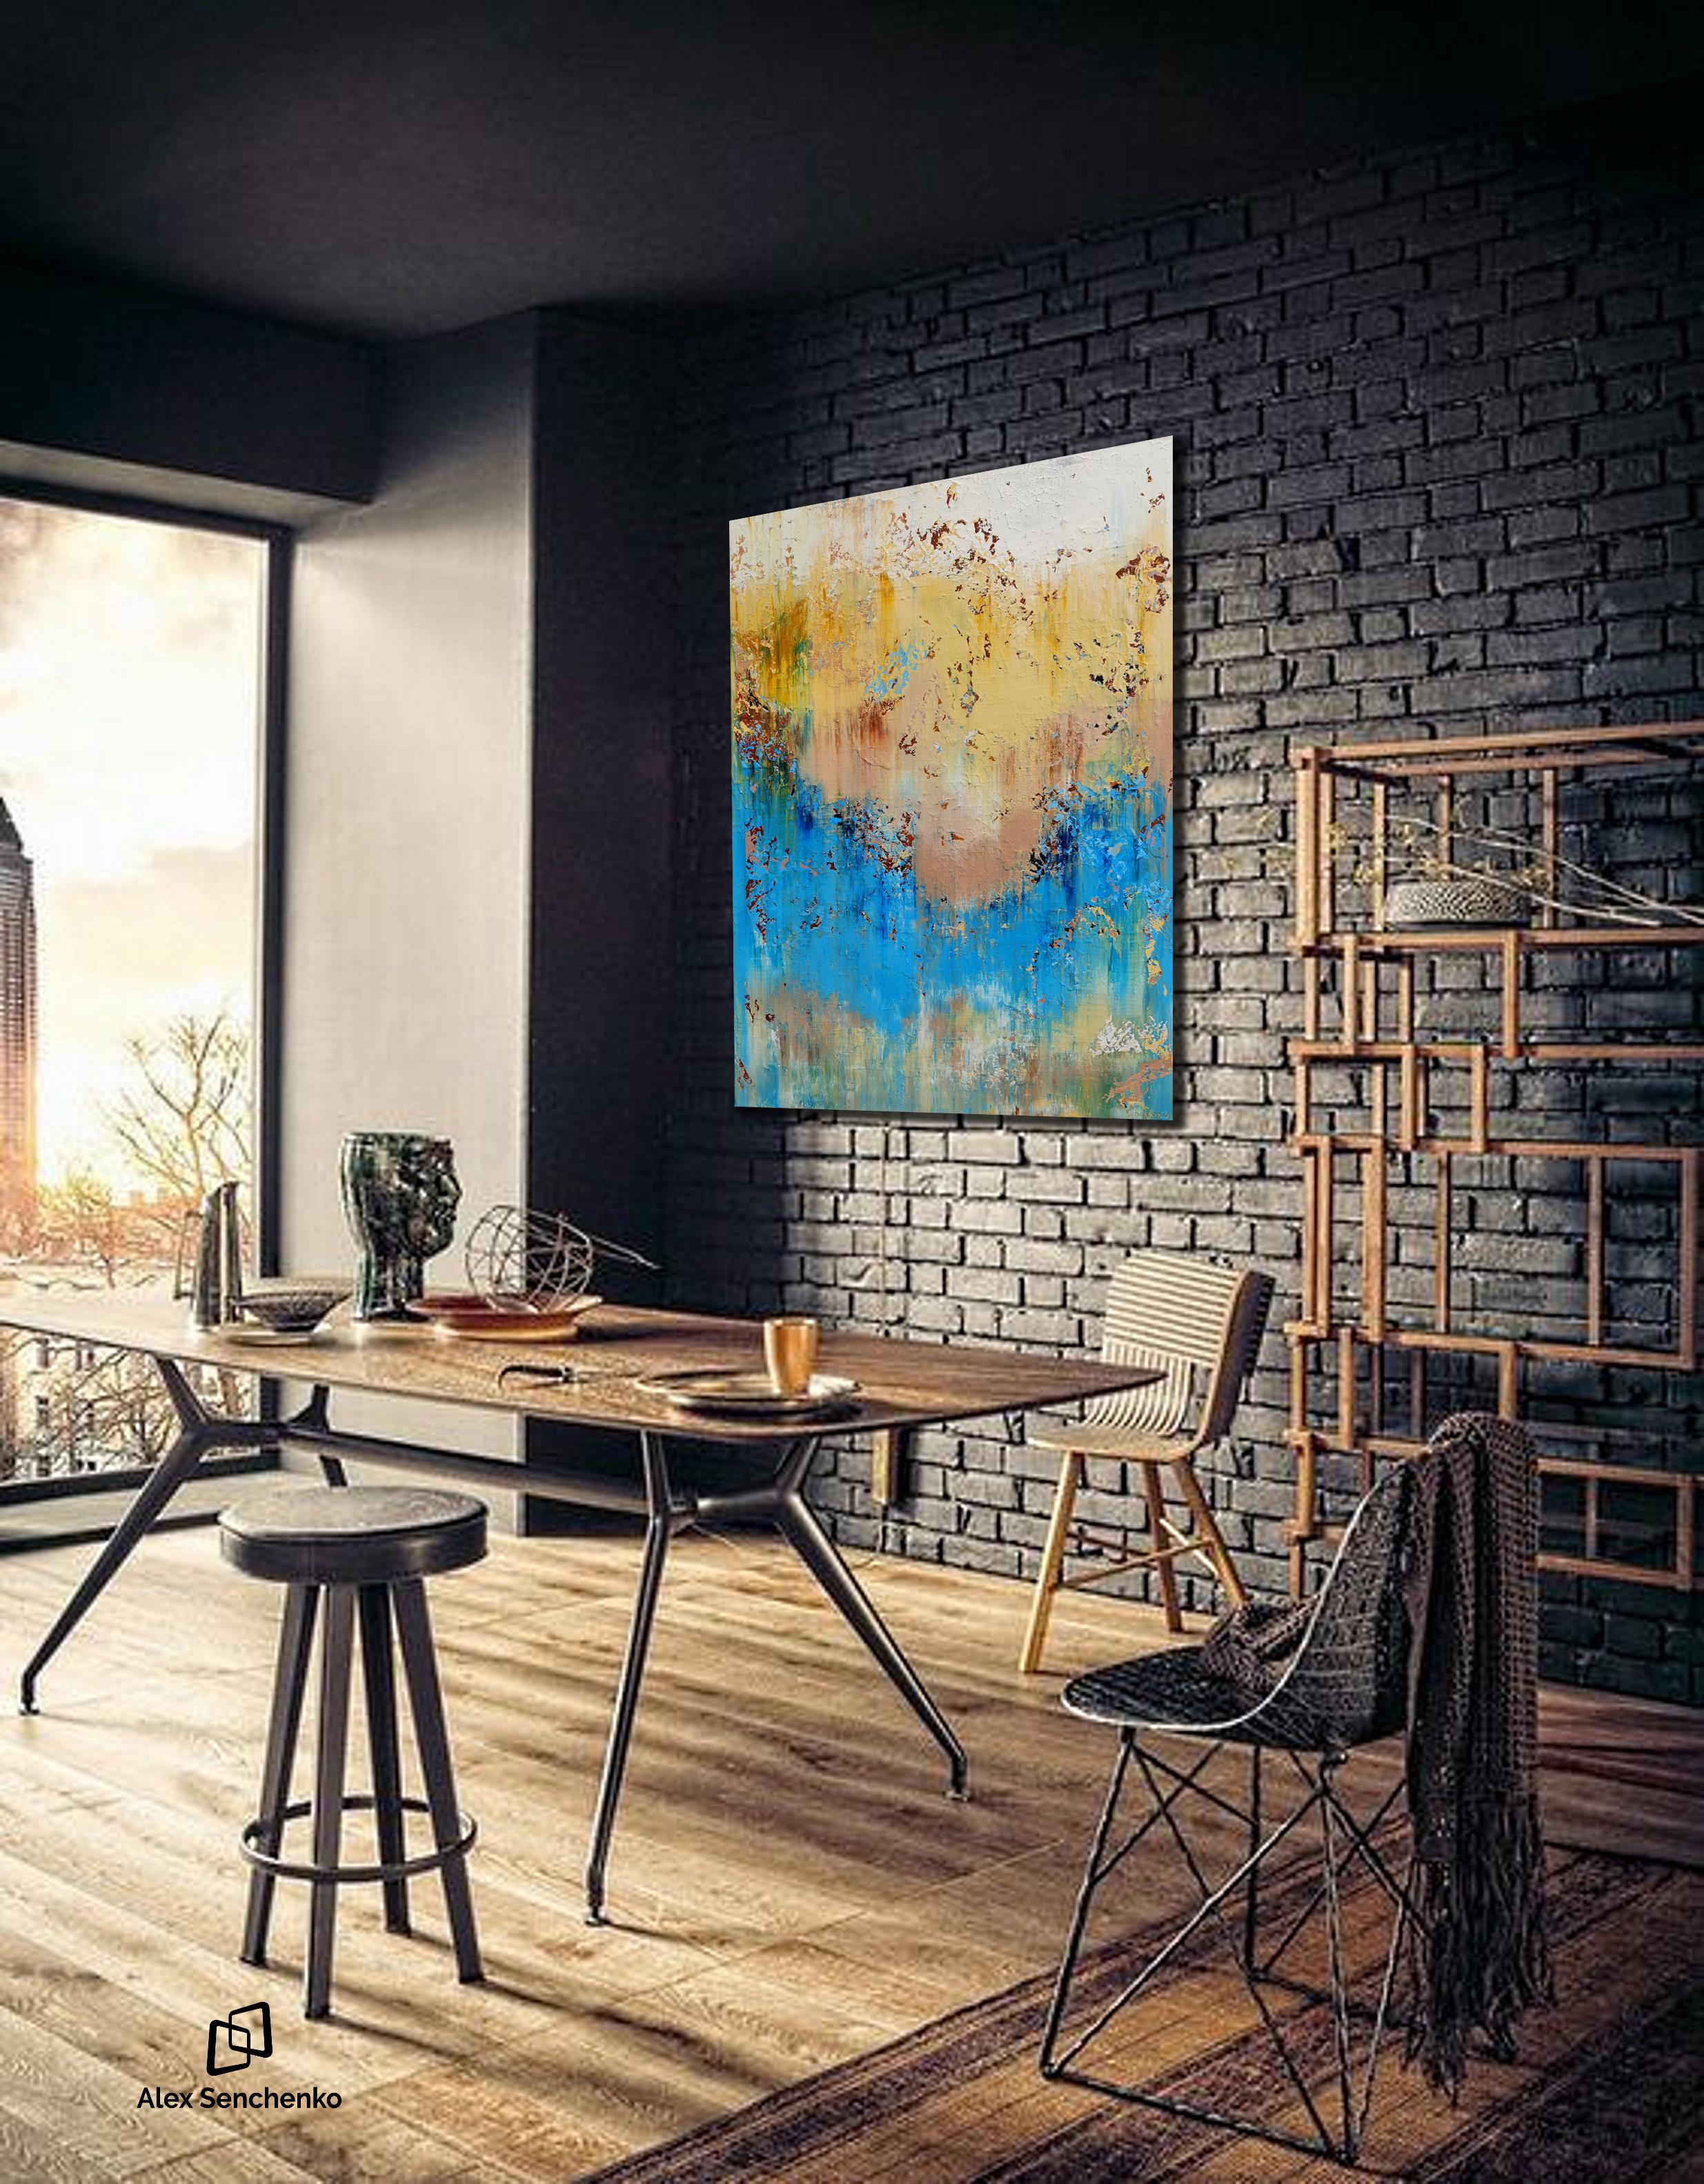 There’s something different about the homes of creative people. They like to surround themselves with inspiring things, from unique tablecloths to the incredible paintings on the walls. Alex Senchenko’s - Abstract 2107 - can give your home that